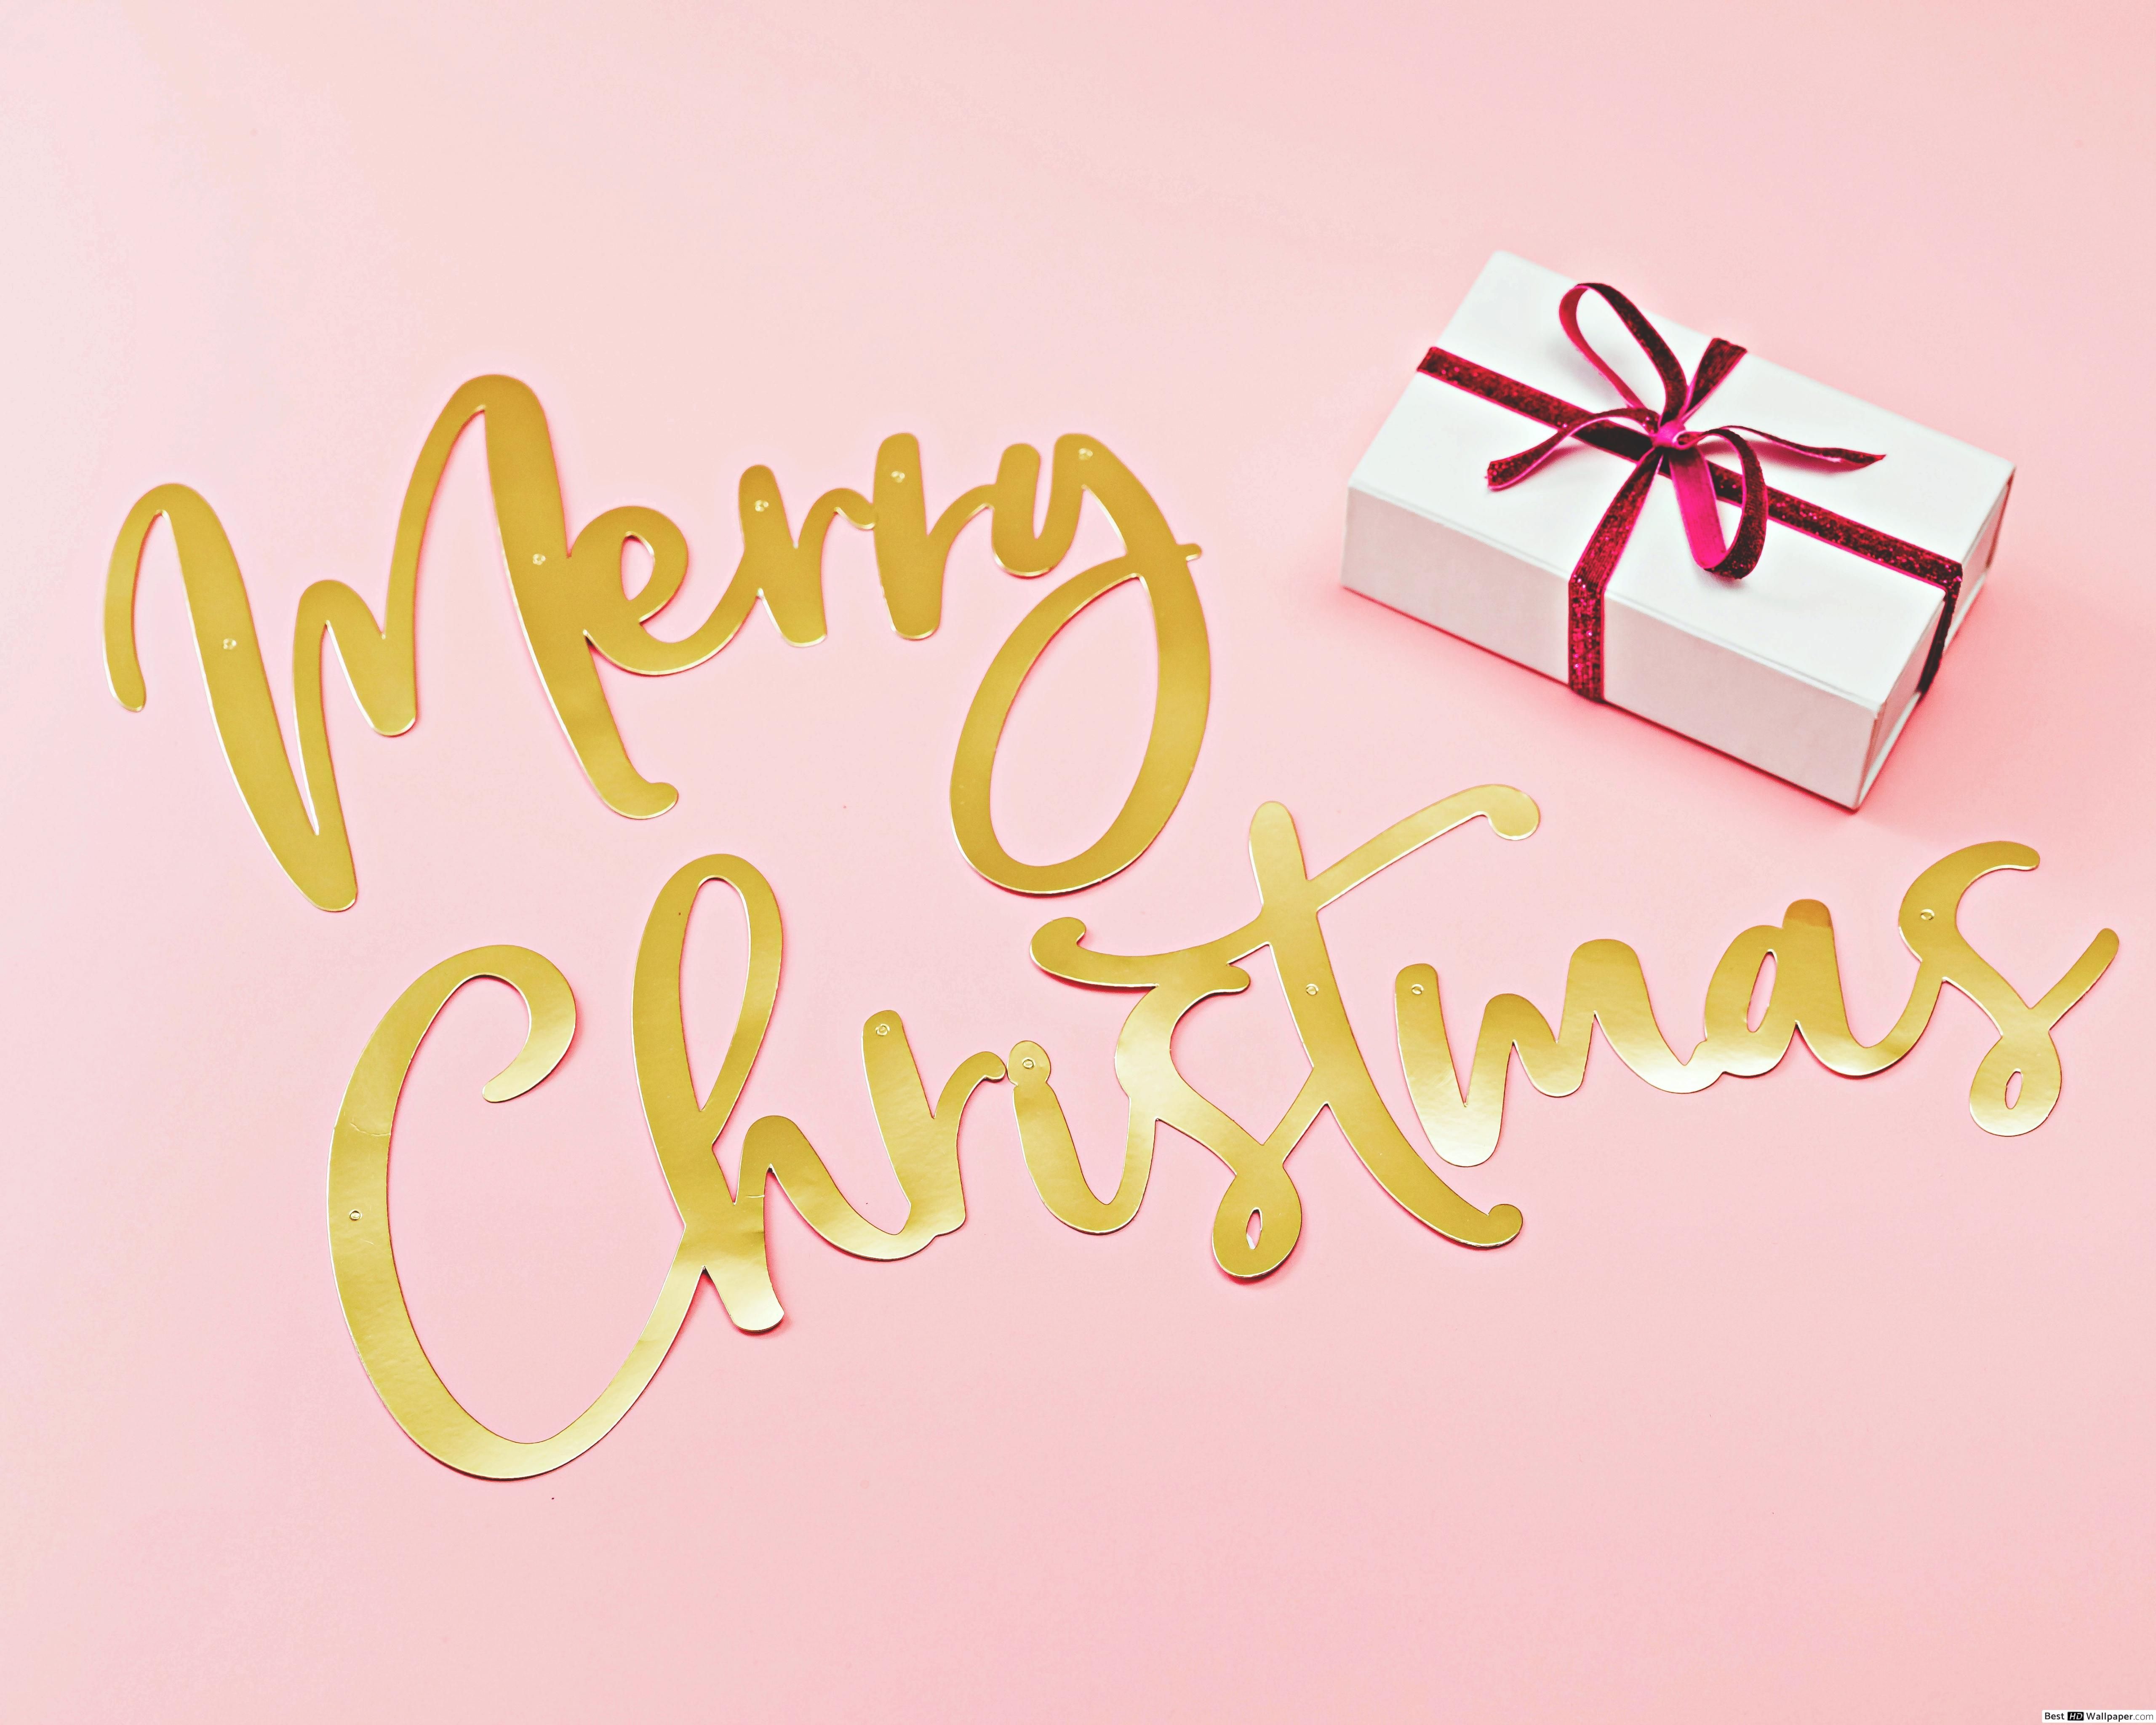 Merry Christmas greetings and a gift in a pink background HD wallpaper download